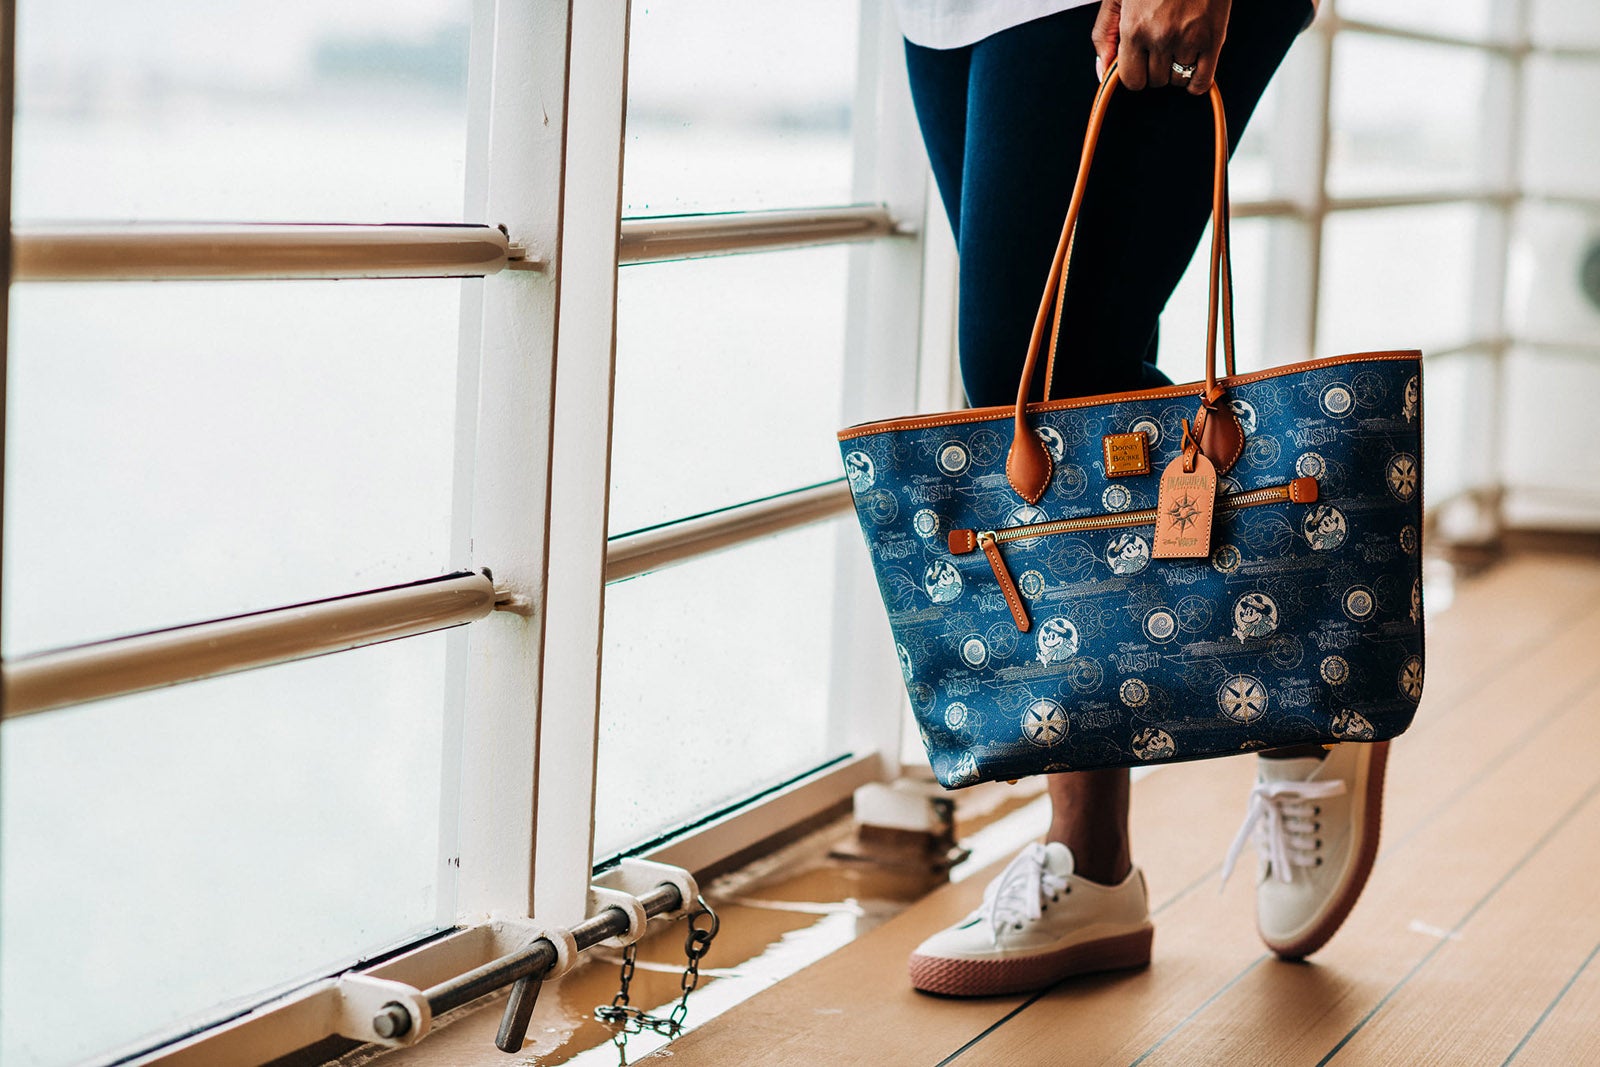 Woman with Disney themed cruise purse